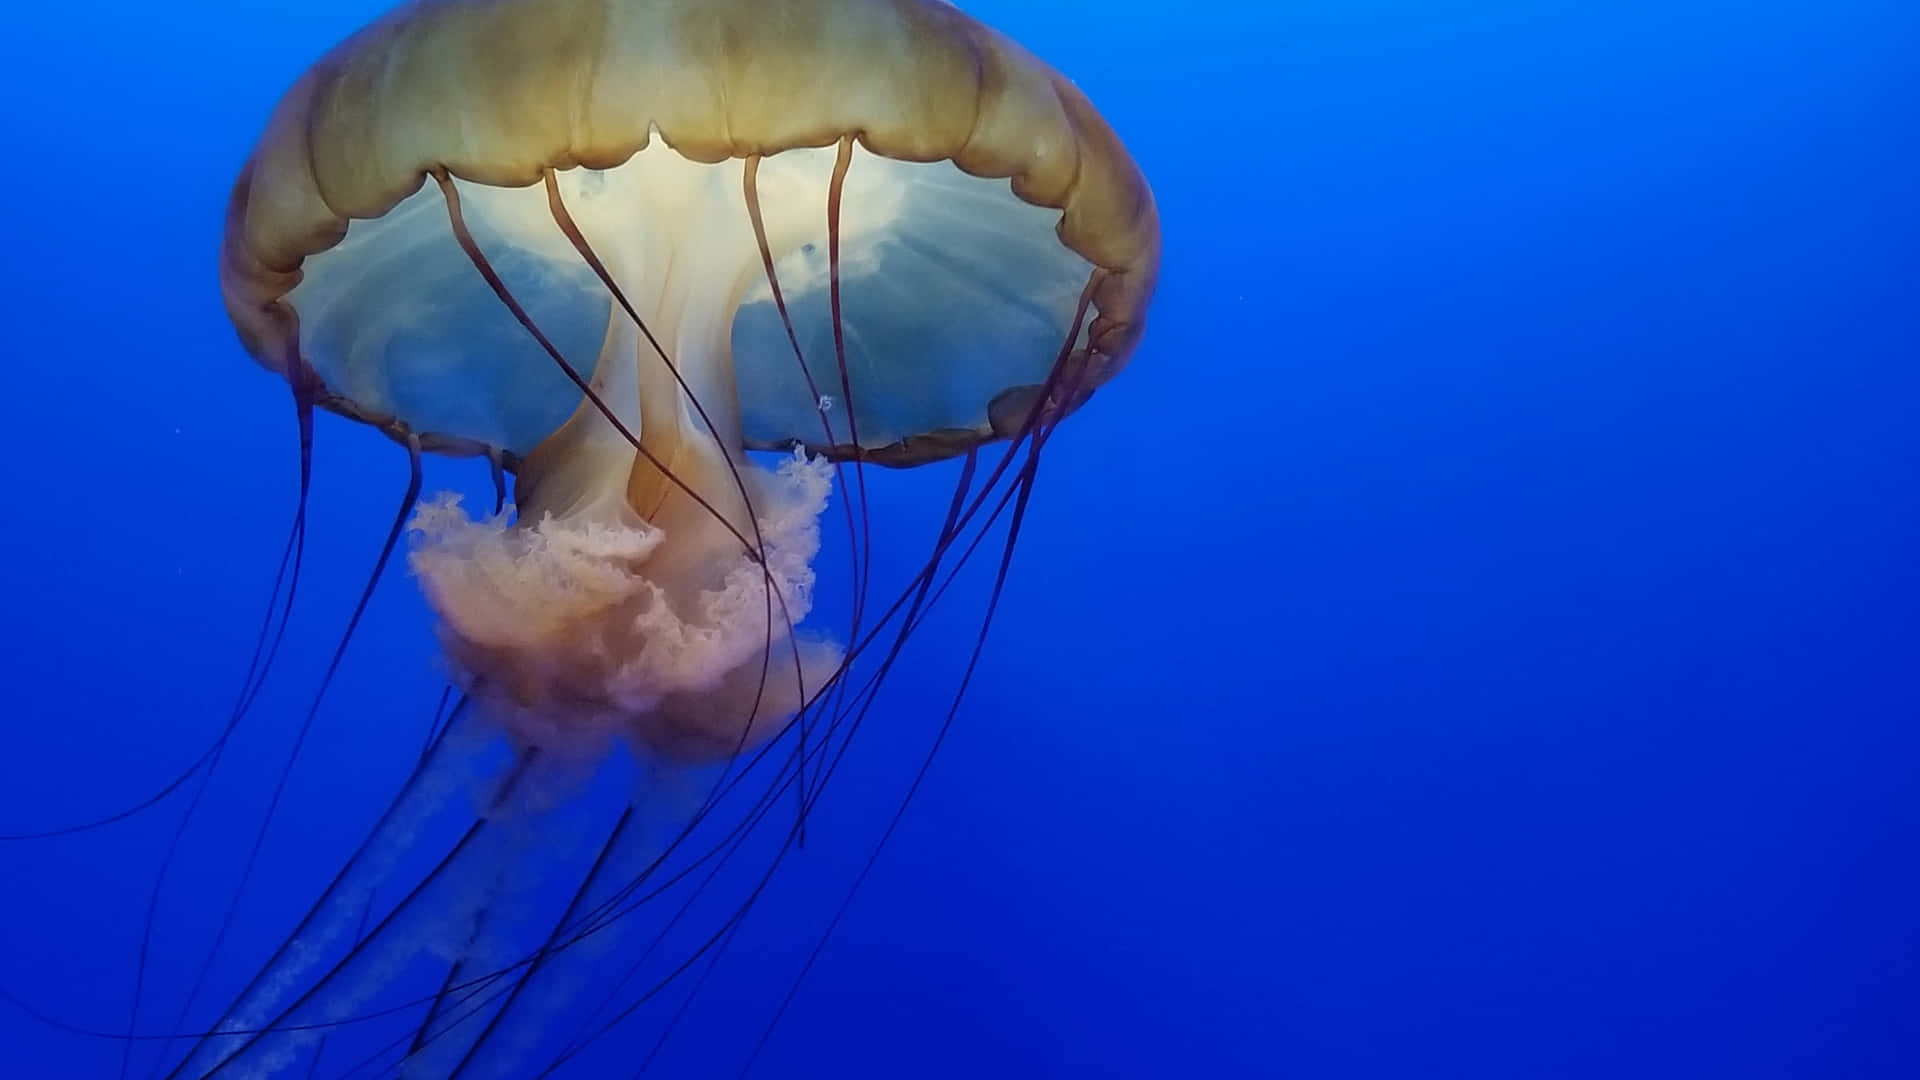 Glowing Iridescent Jellyfish Lit Up By Vibrant Blue Neon Lighting